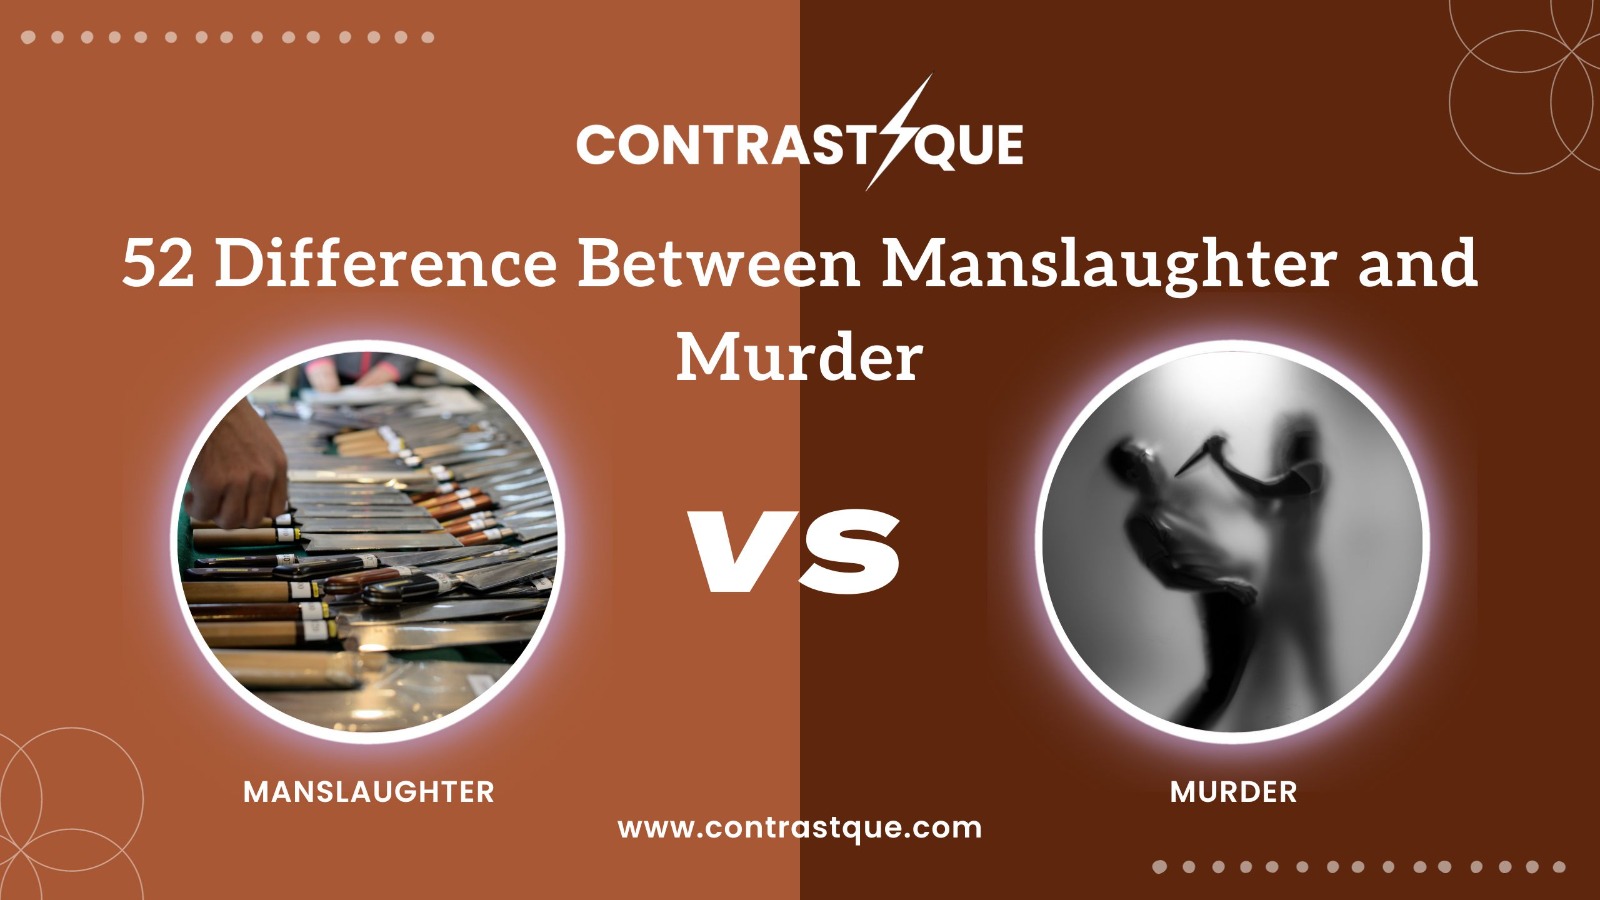 52 Difference Between Manslaughter and Murder